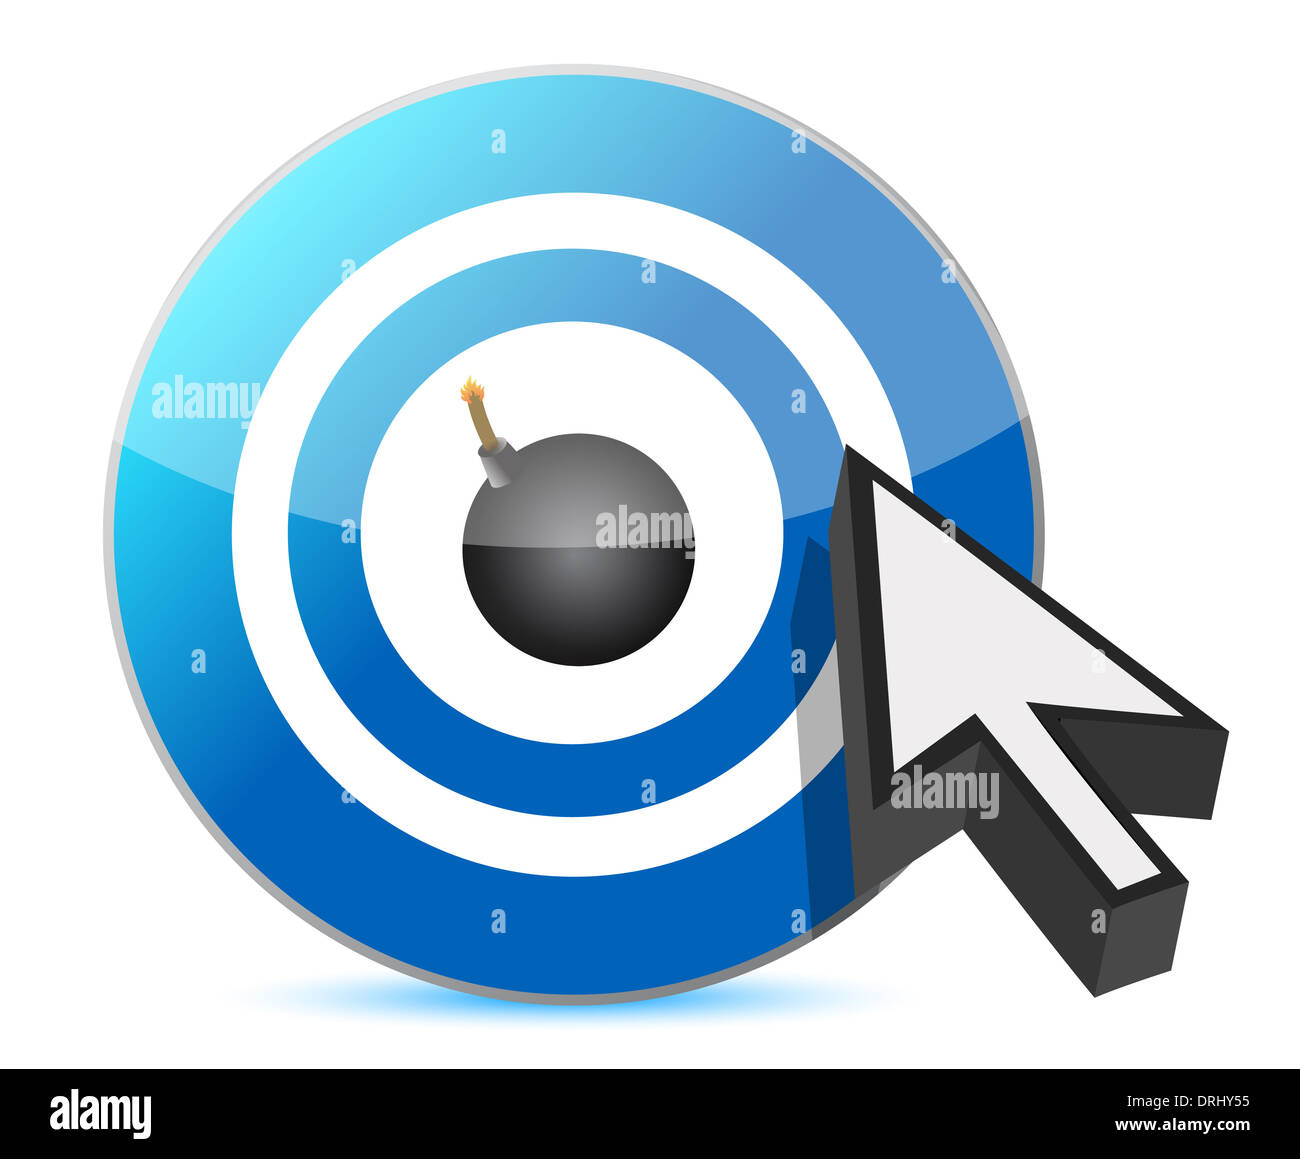 Targeting a boom illustration design over white background Stock Photo